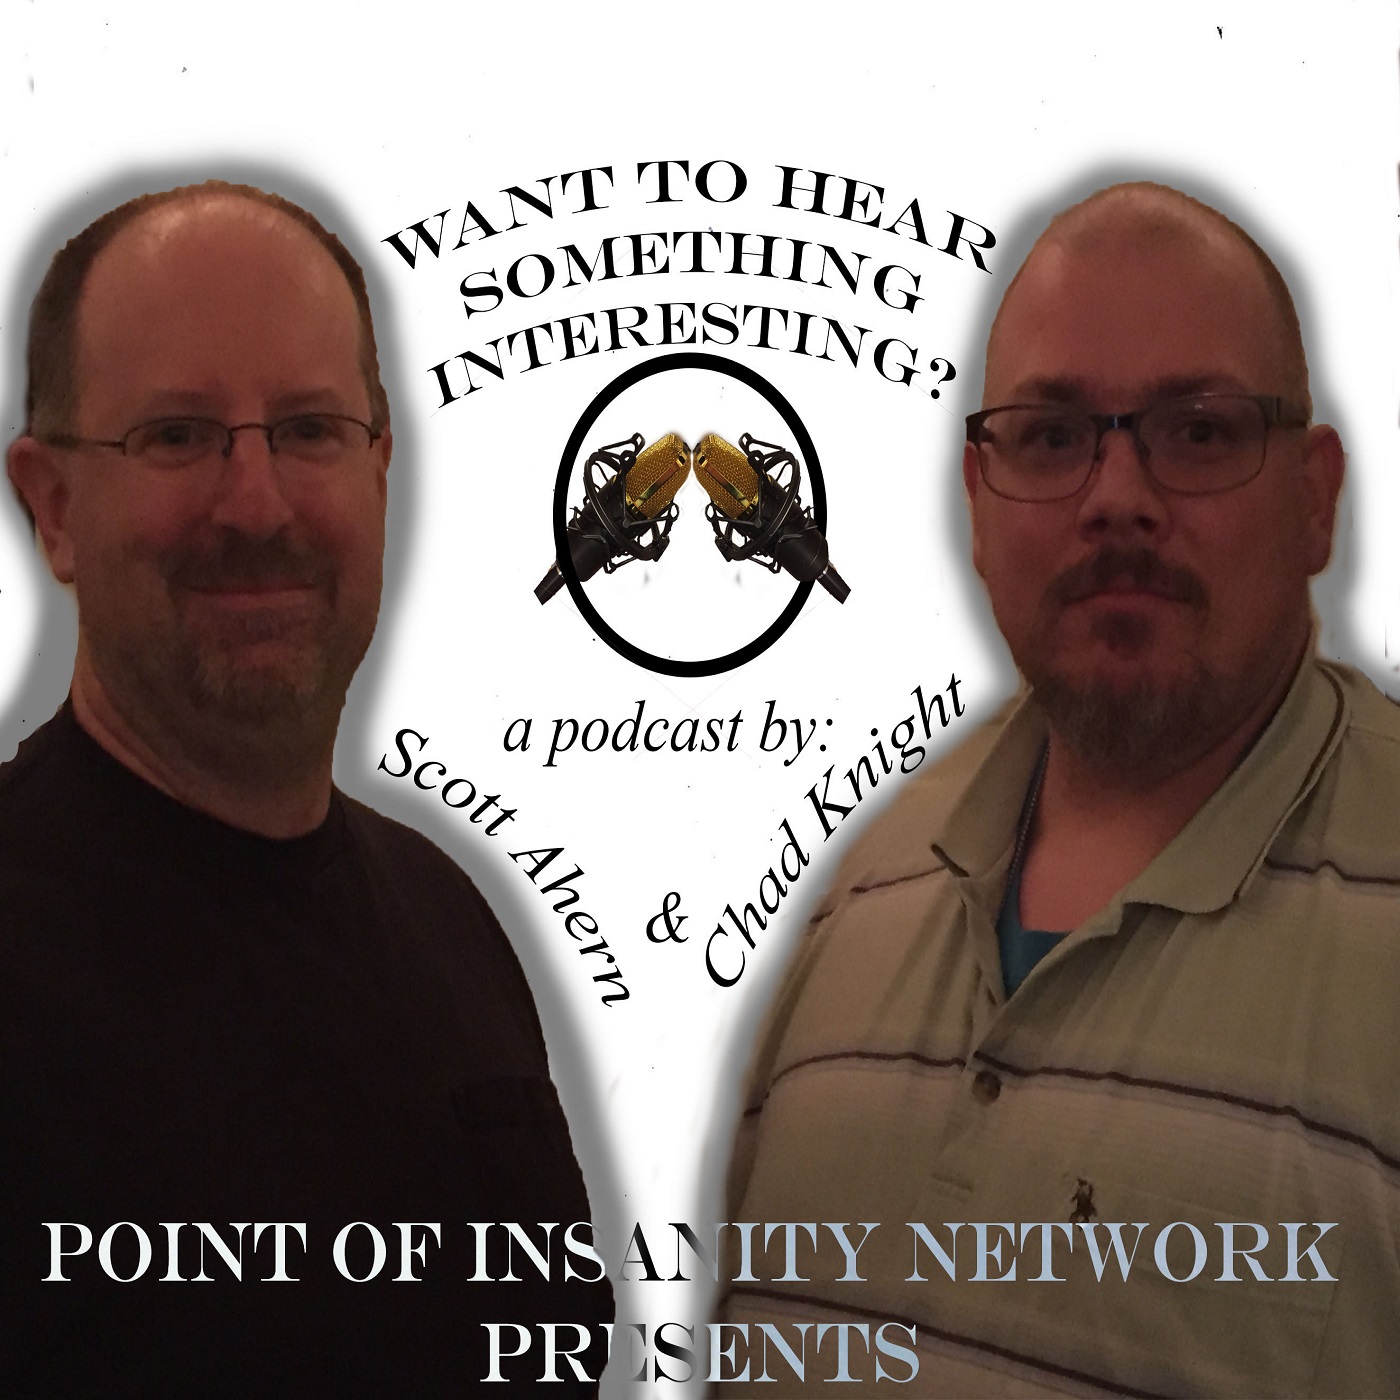 Want to Hear Something Interesting? - Episode 13 - Geek Love